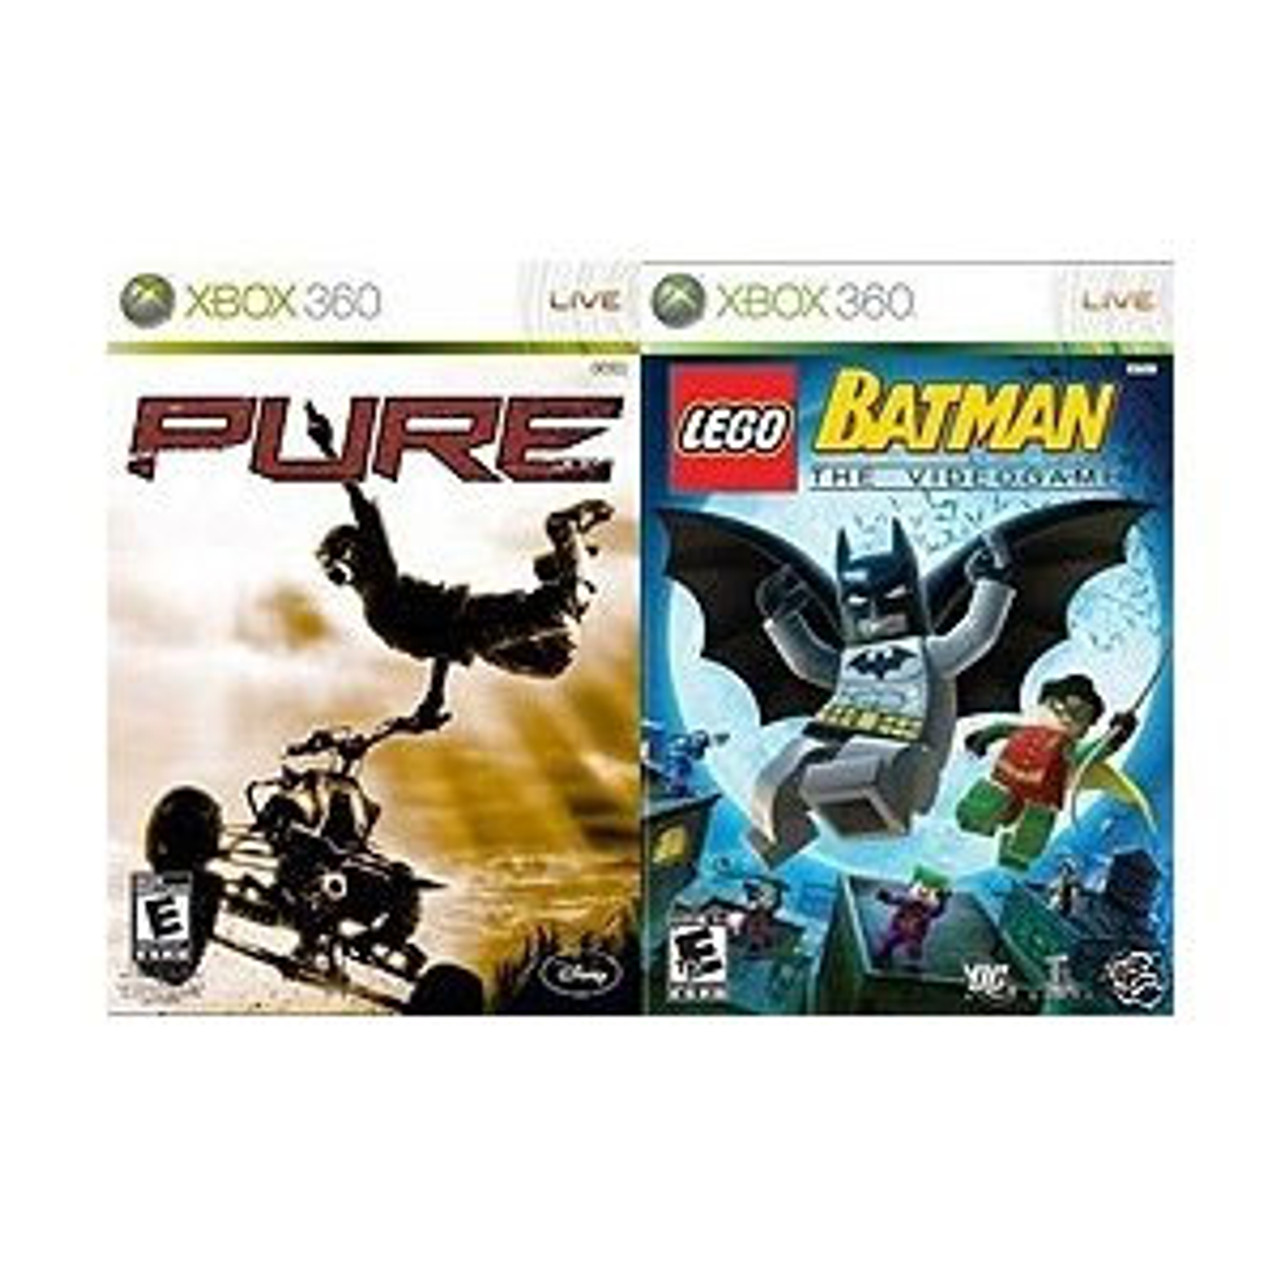 Lego Batman 1 And 2 Wii Bundle- Both Complete With Case, Manual And Games!